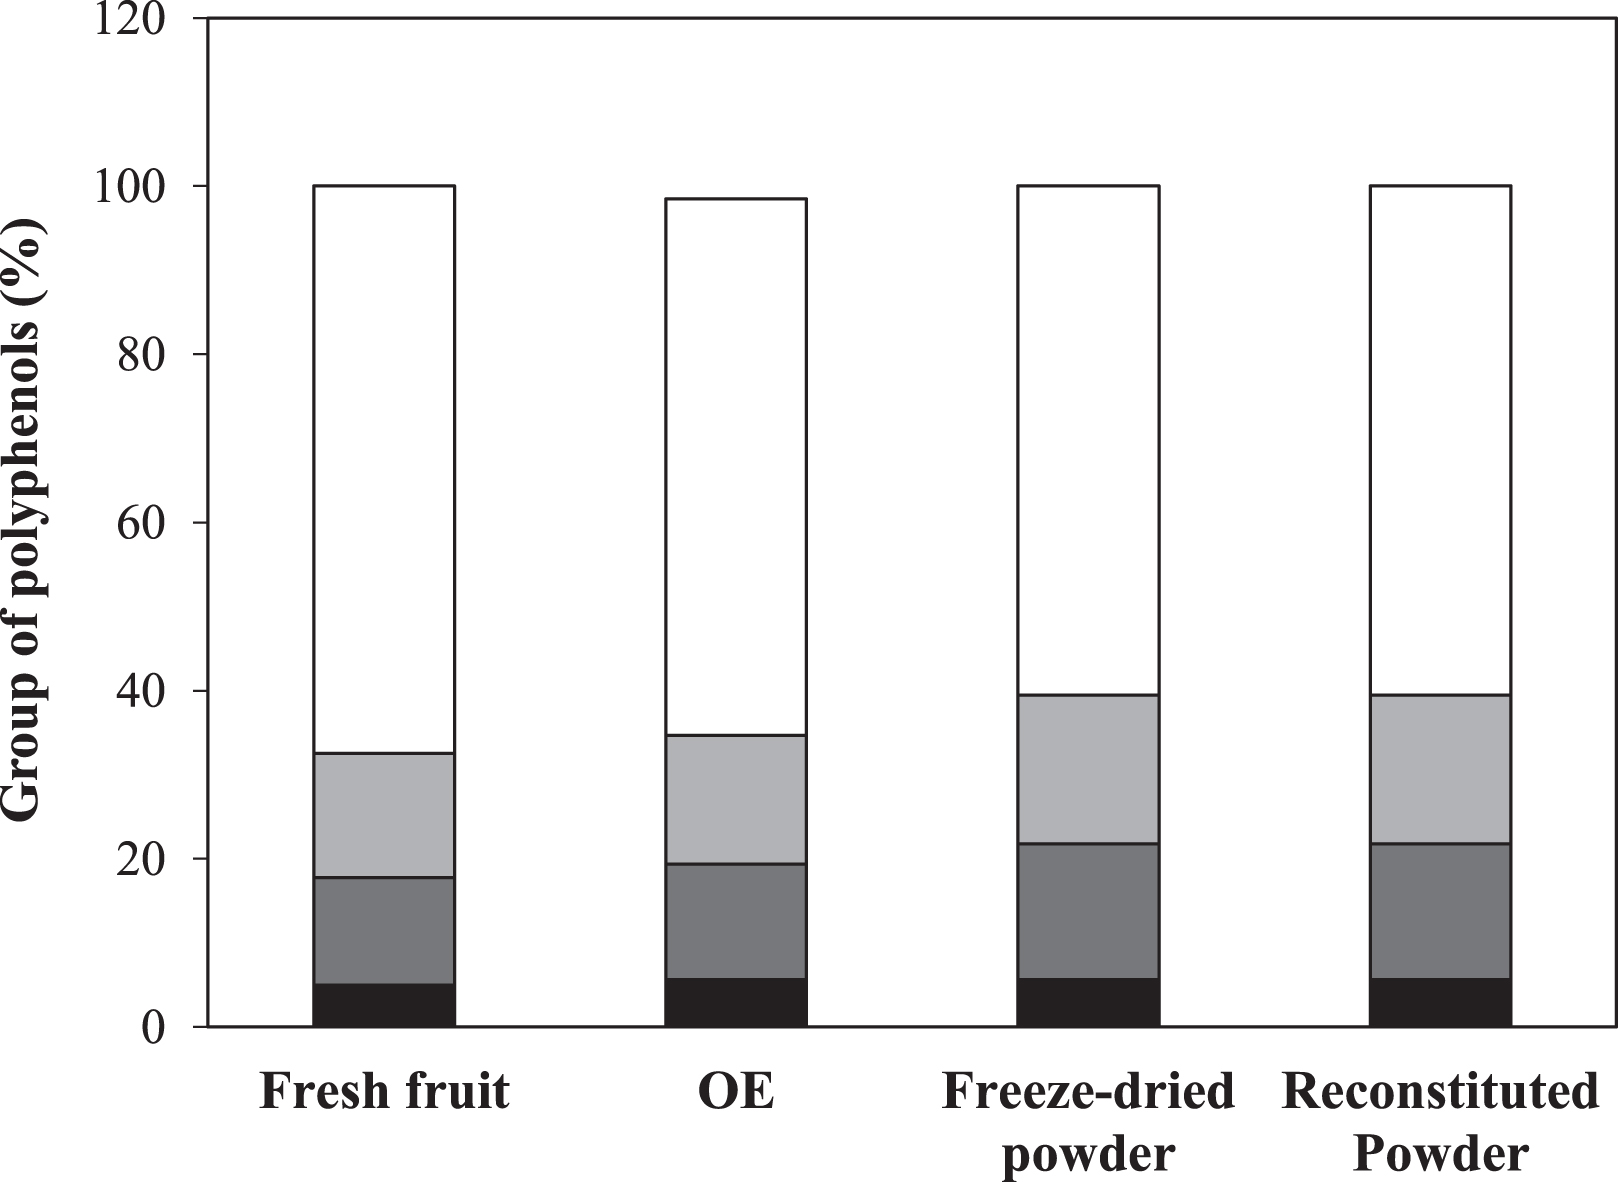 Main phenolic groups (%) in samples produced after processing steps: elderberry fruit, OE, freeze-dried powder, and reconstituted powder. Phenolic acids (black), flavan-3-ols (dark gray), flavonols (light gray), anthocyanins (white).